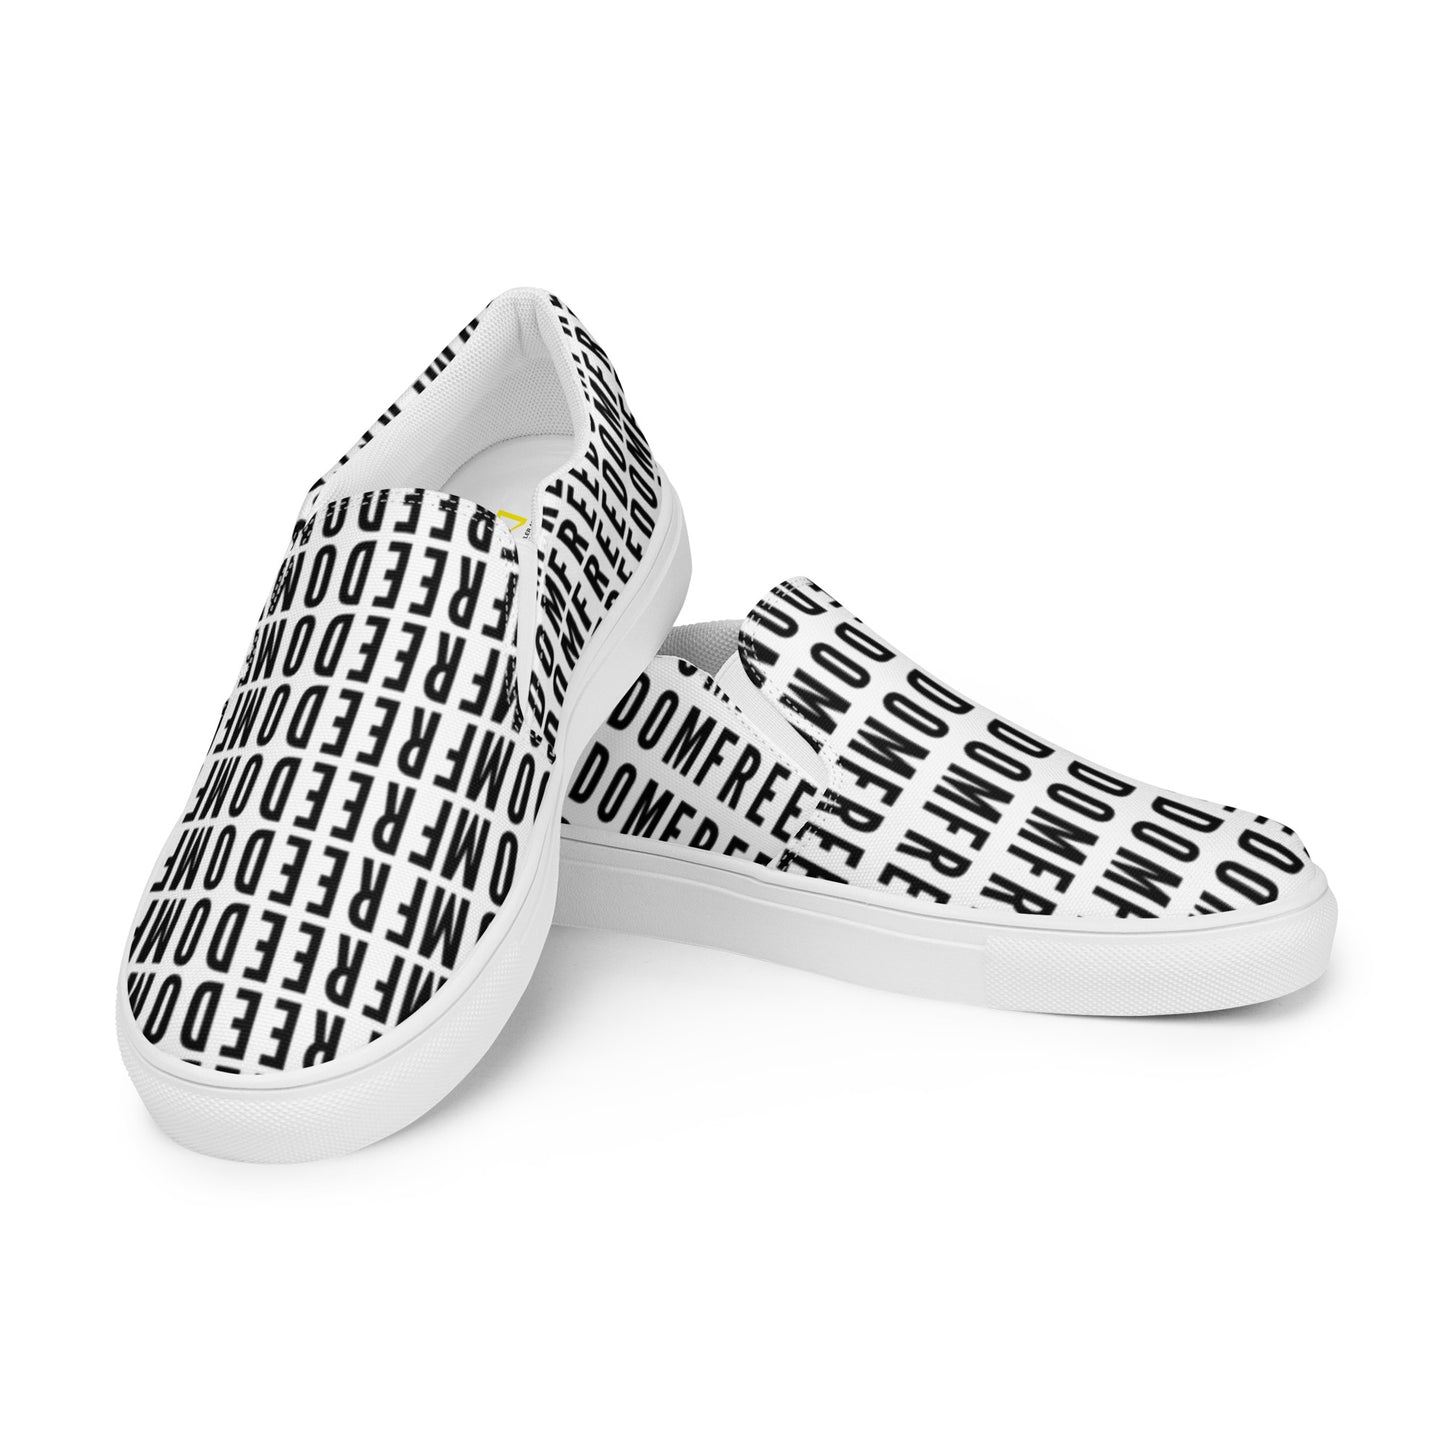 FREEDOM Men’s slip-on canvas shoes